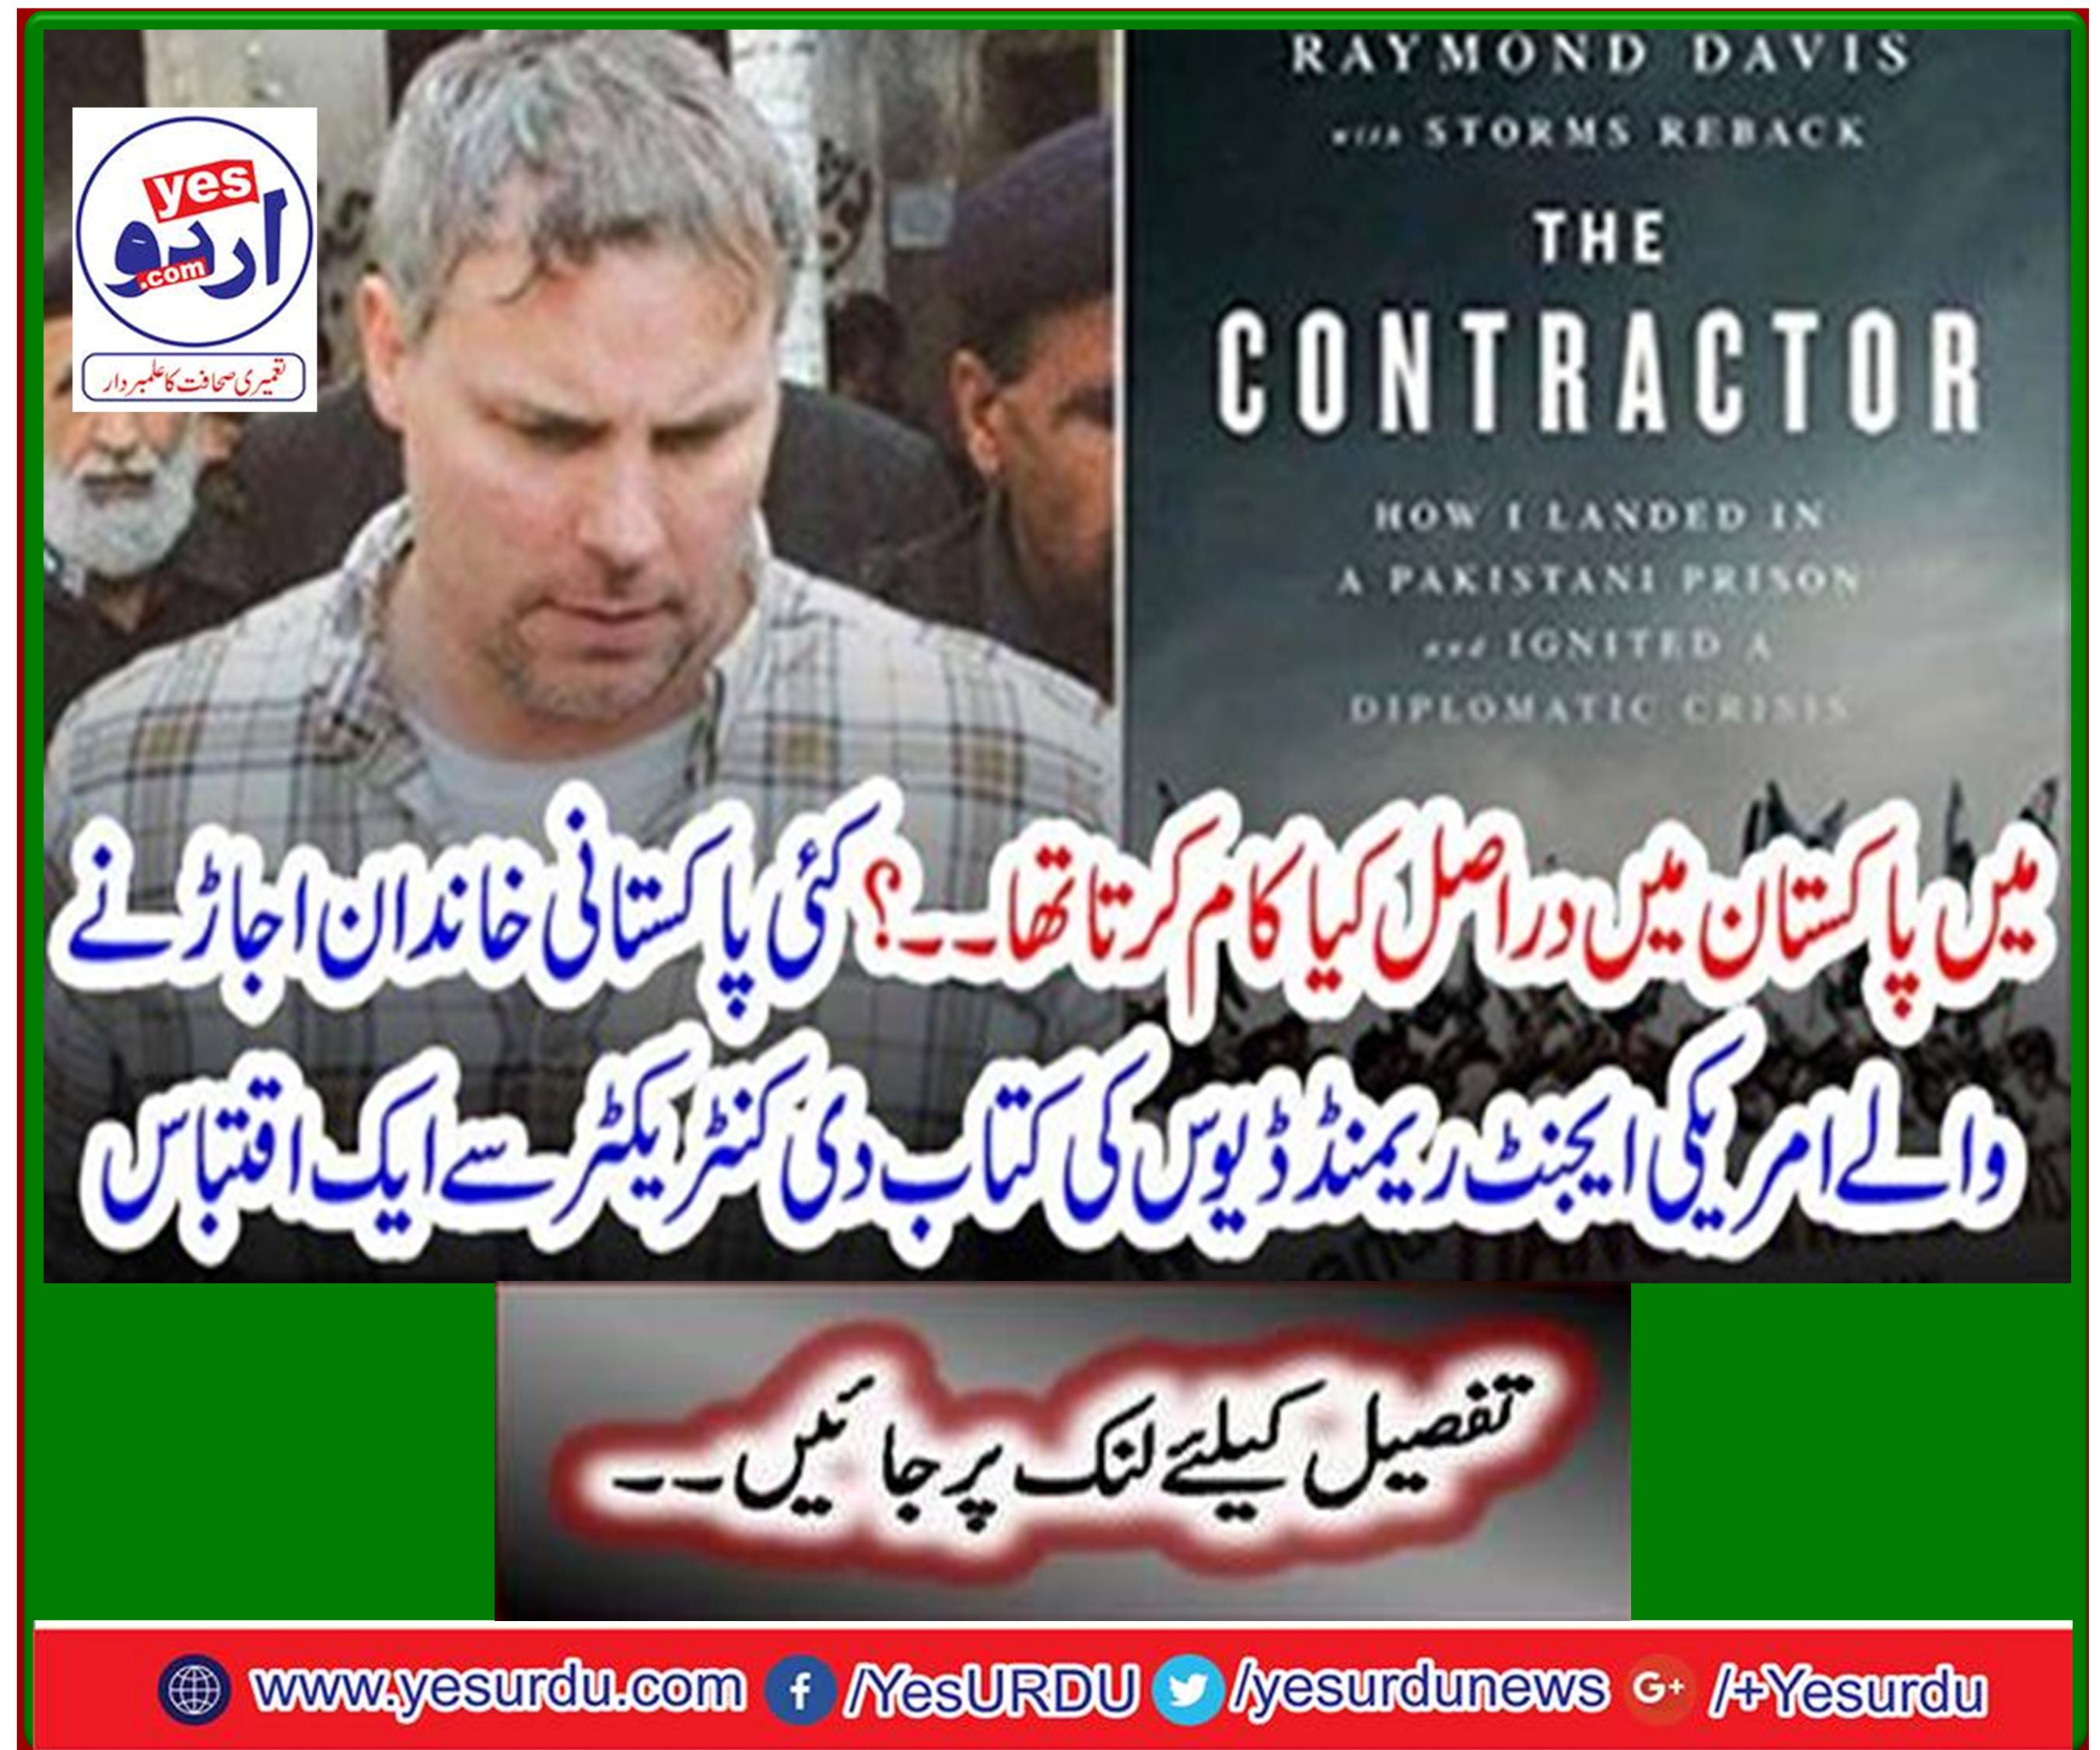 An excerpt from the book The Contractor, by American Agent Raymond Davis, who ruined several Pakistani families